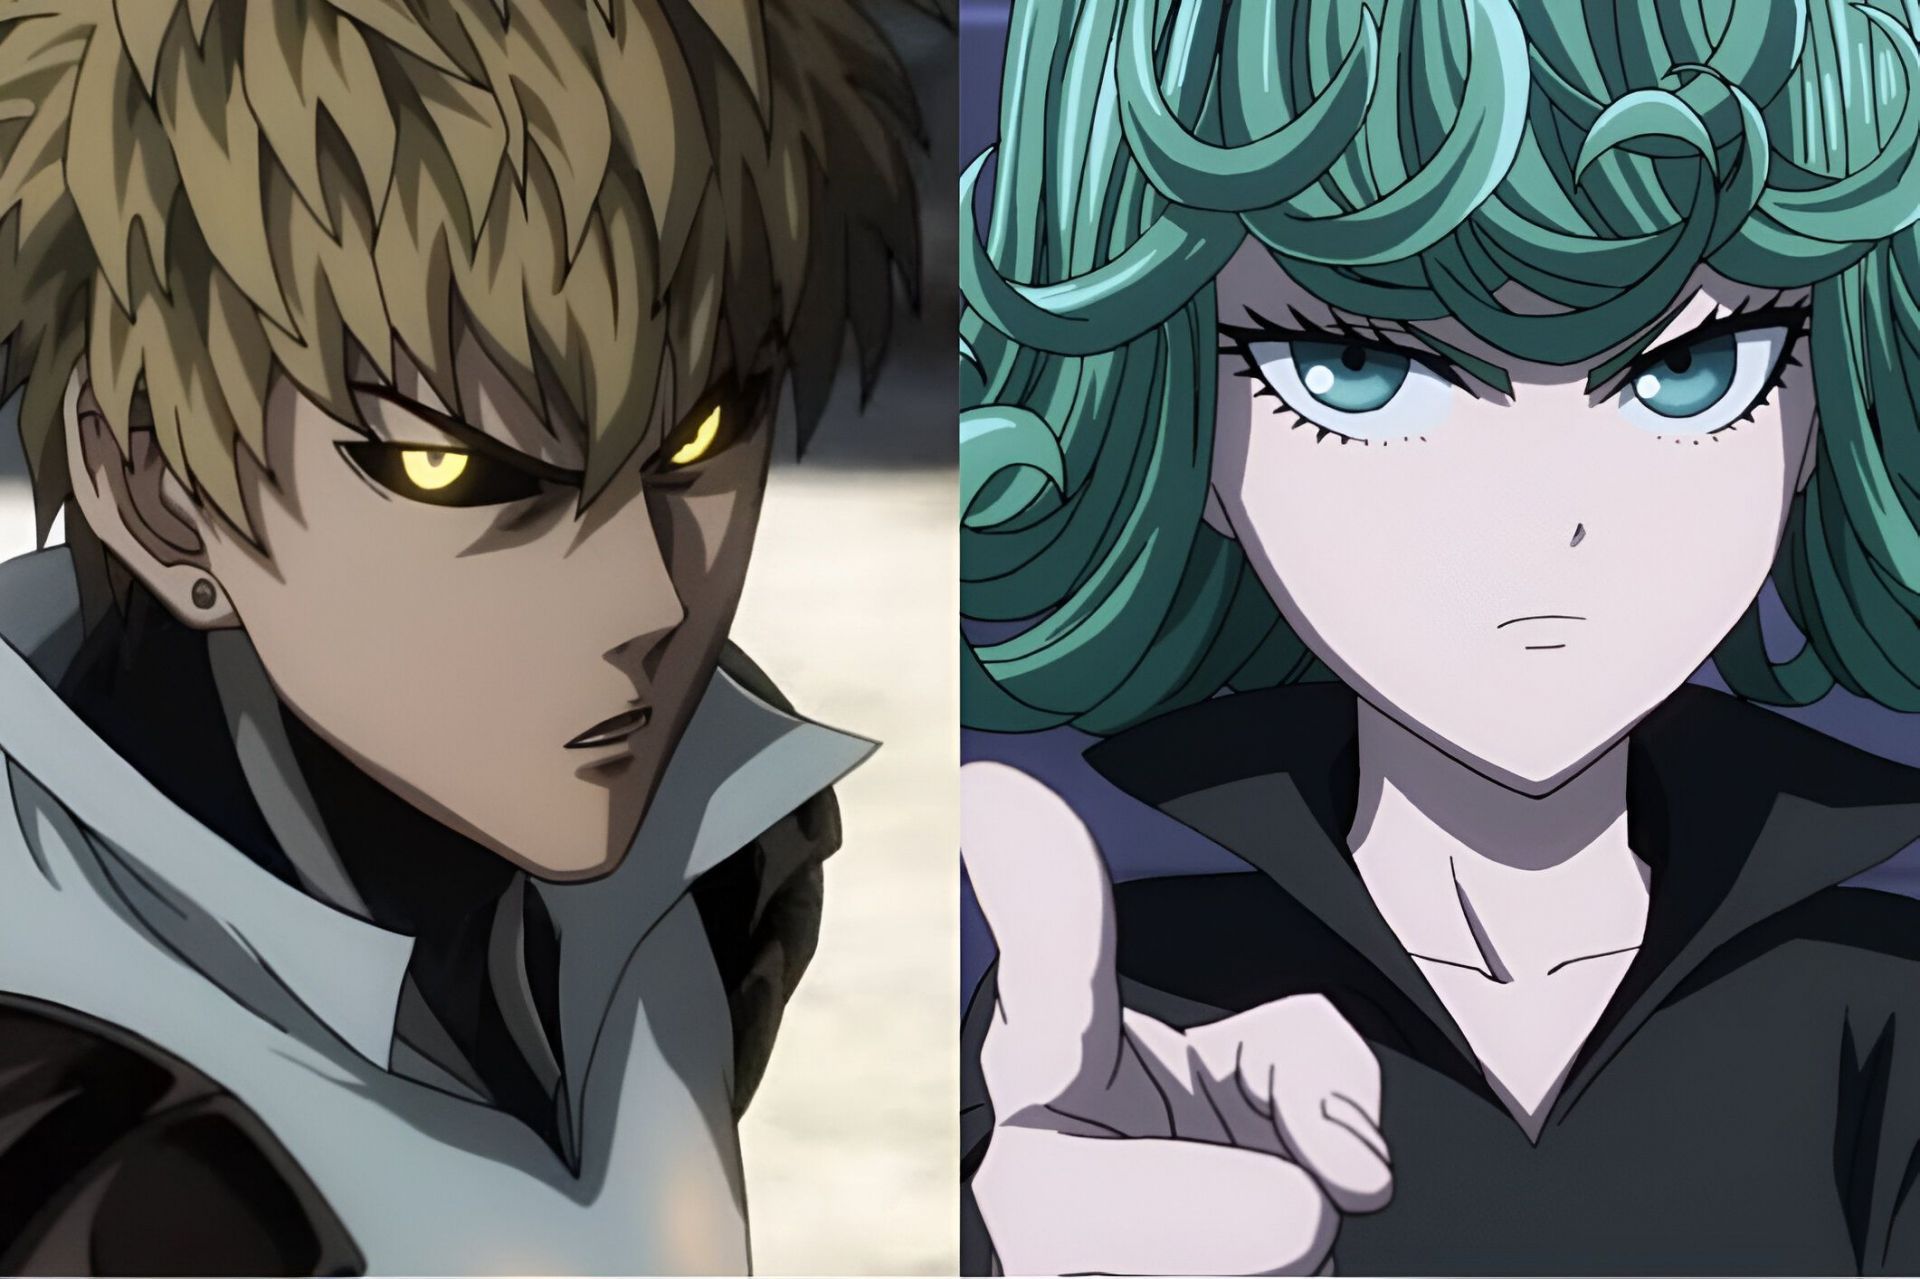 Genos (left) and Tatsumaki (right) as seen in the anime (Image via Madhouse)